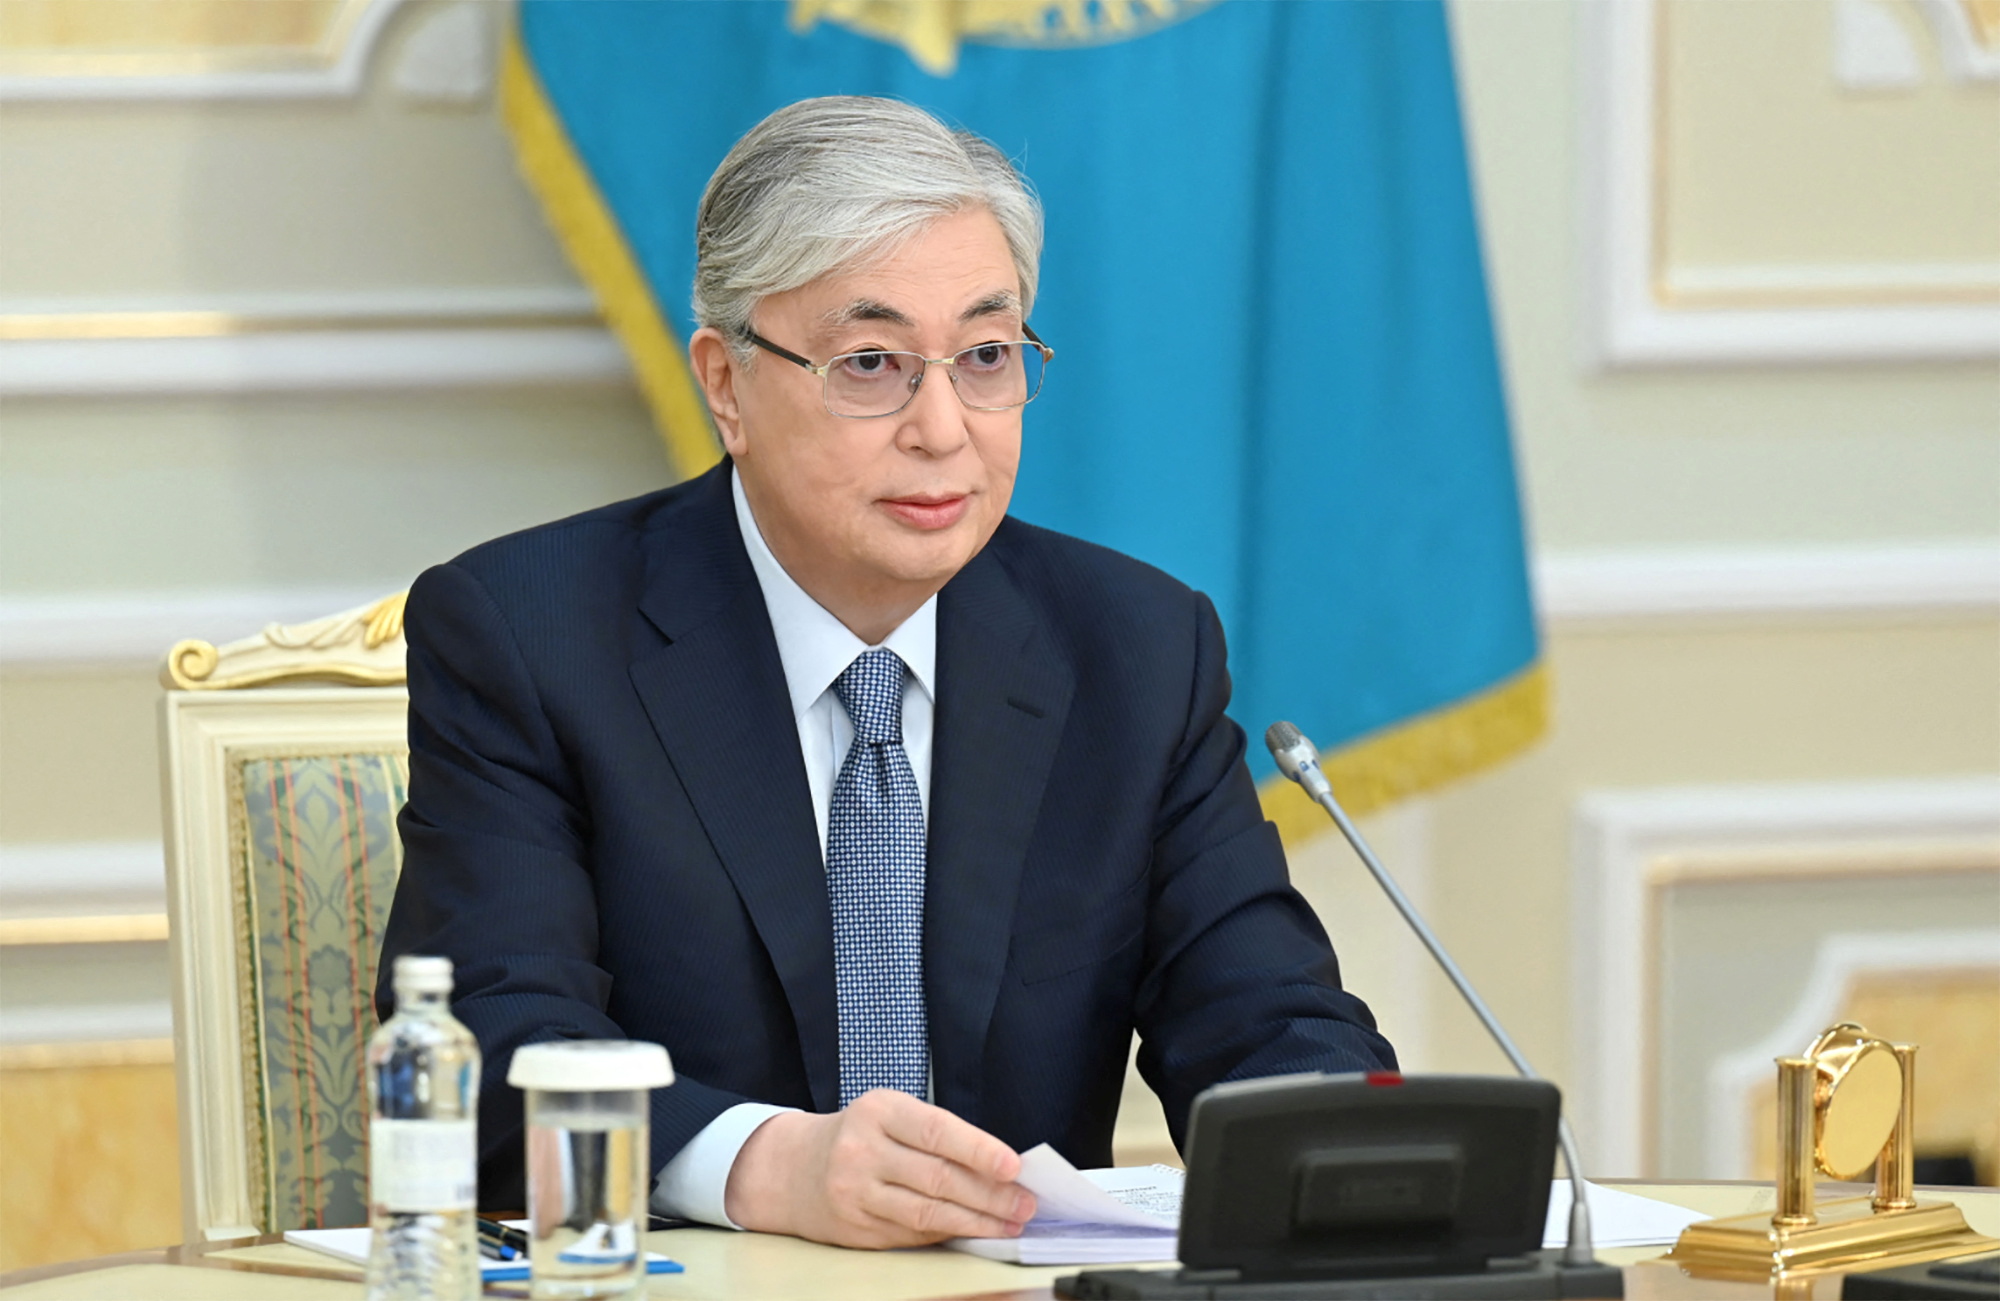 Kazakh President Kassym-Jomart Tokayev attends a session of parliament via a video link in Nur-Sultan, Kazakhstan January 11, 2022. Official website of the President of Kazakhstan/Handout via REUTERS ATTENTION EDITORS - THIS IMAGE HAS BEEN SUPPLIED BY A THIRD PARTY.